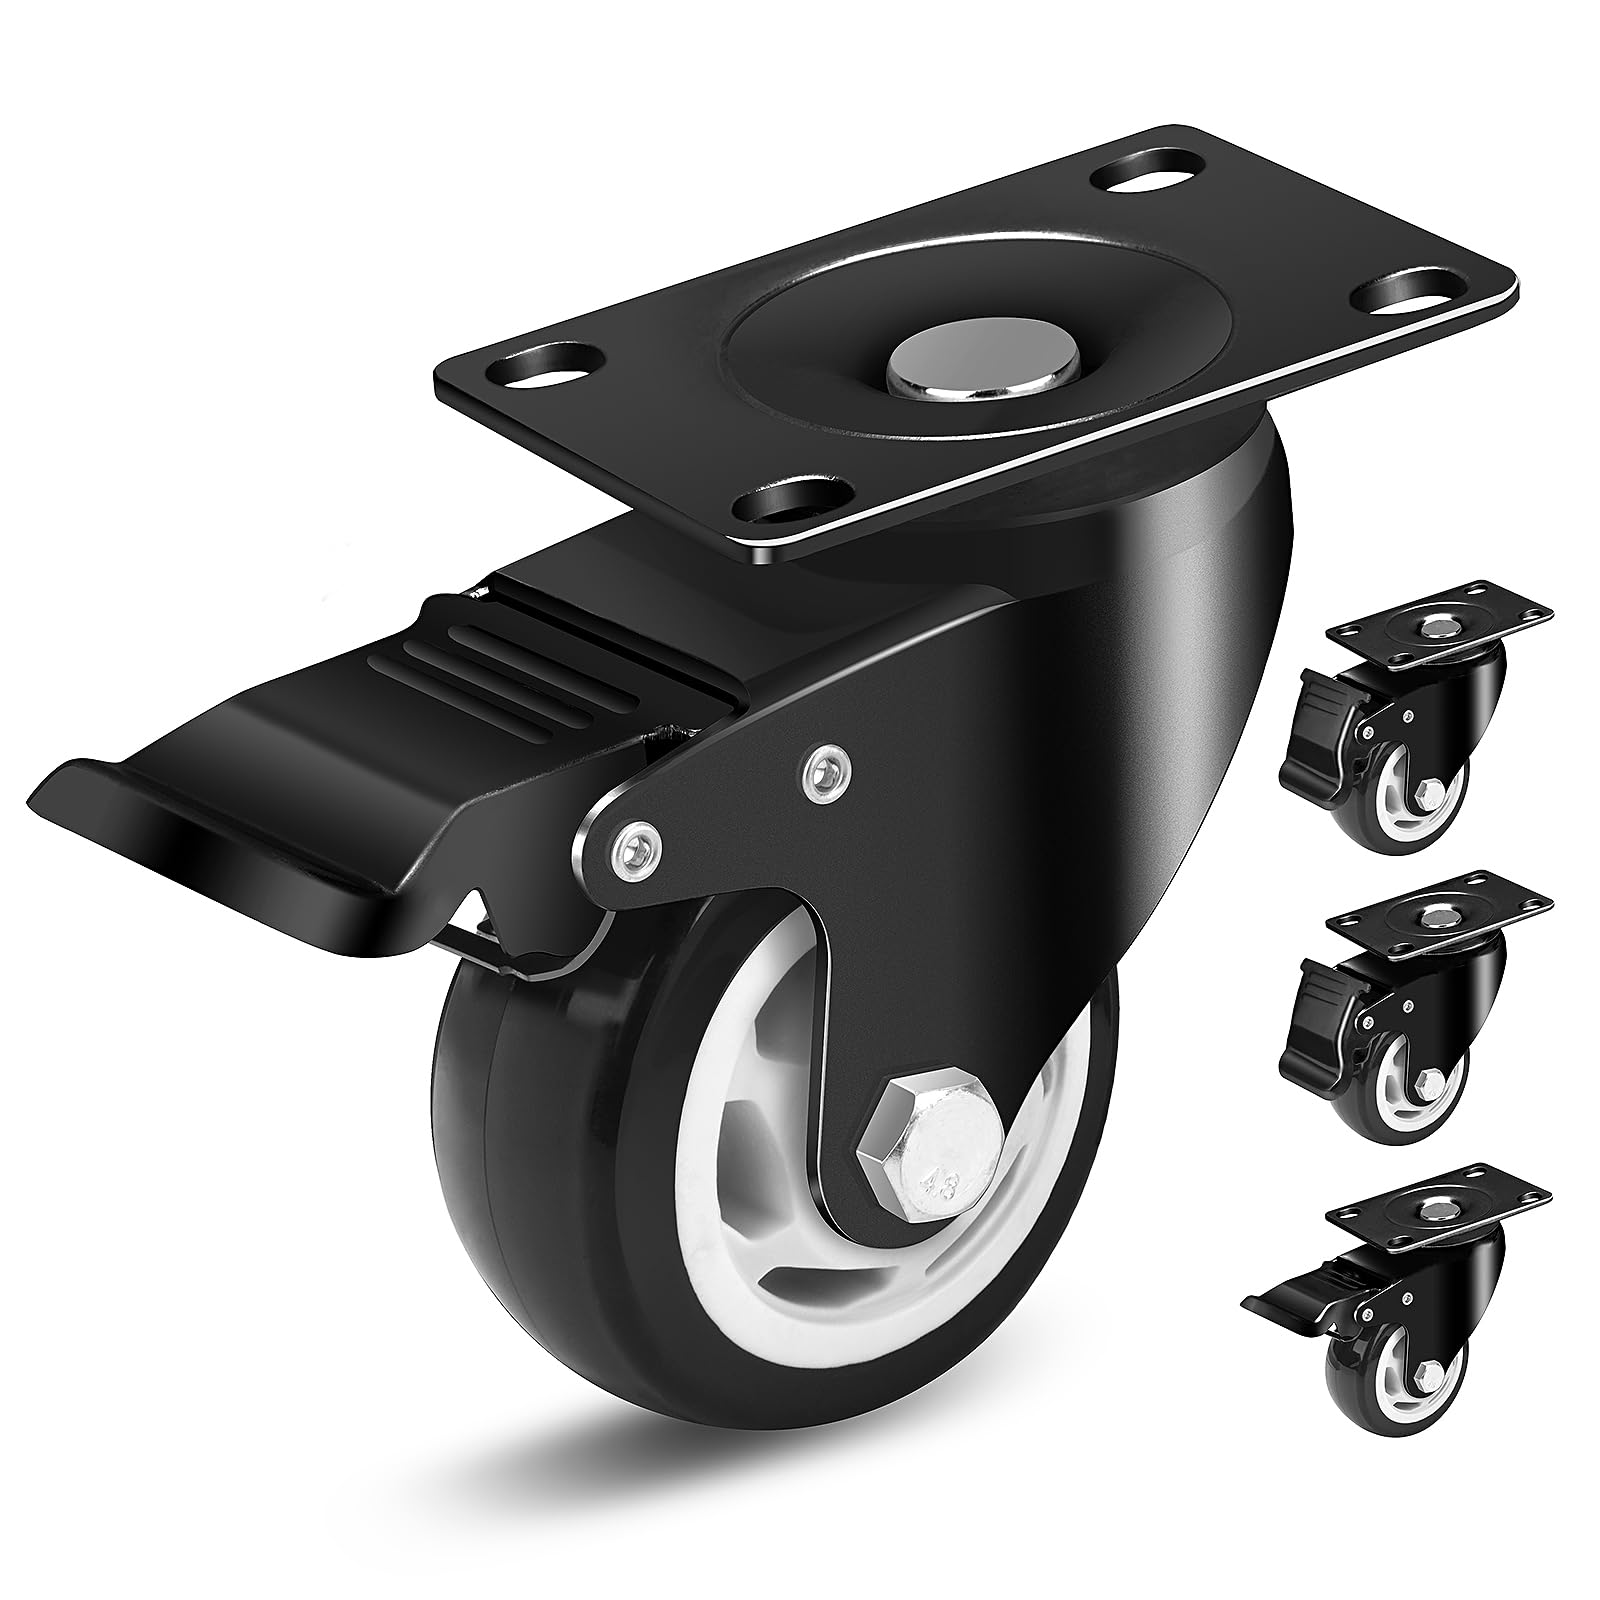 BQQCSTY BQQC-1 3 Inch Caster Wheels, Swivel Casters Set of 4 Heavy Duty  with Brake 1000 LBS, Ball Bearing 360 Degree Top Swivel Plate Casters